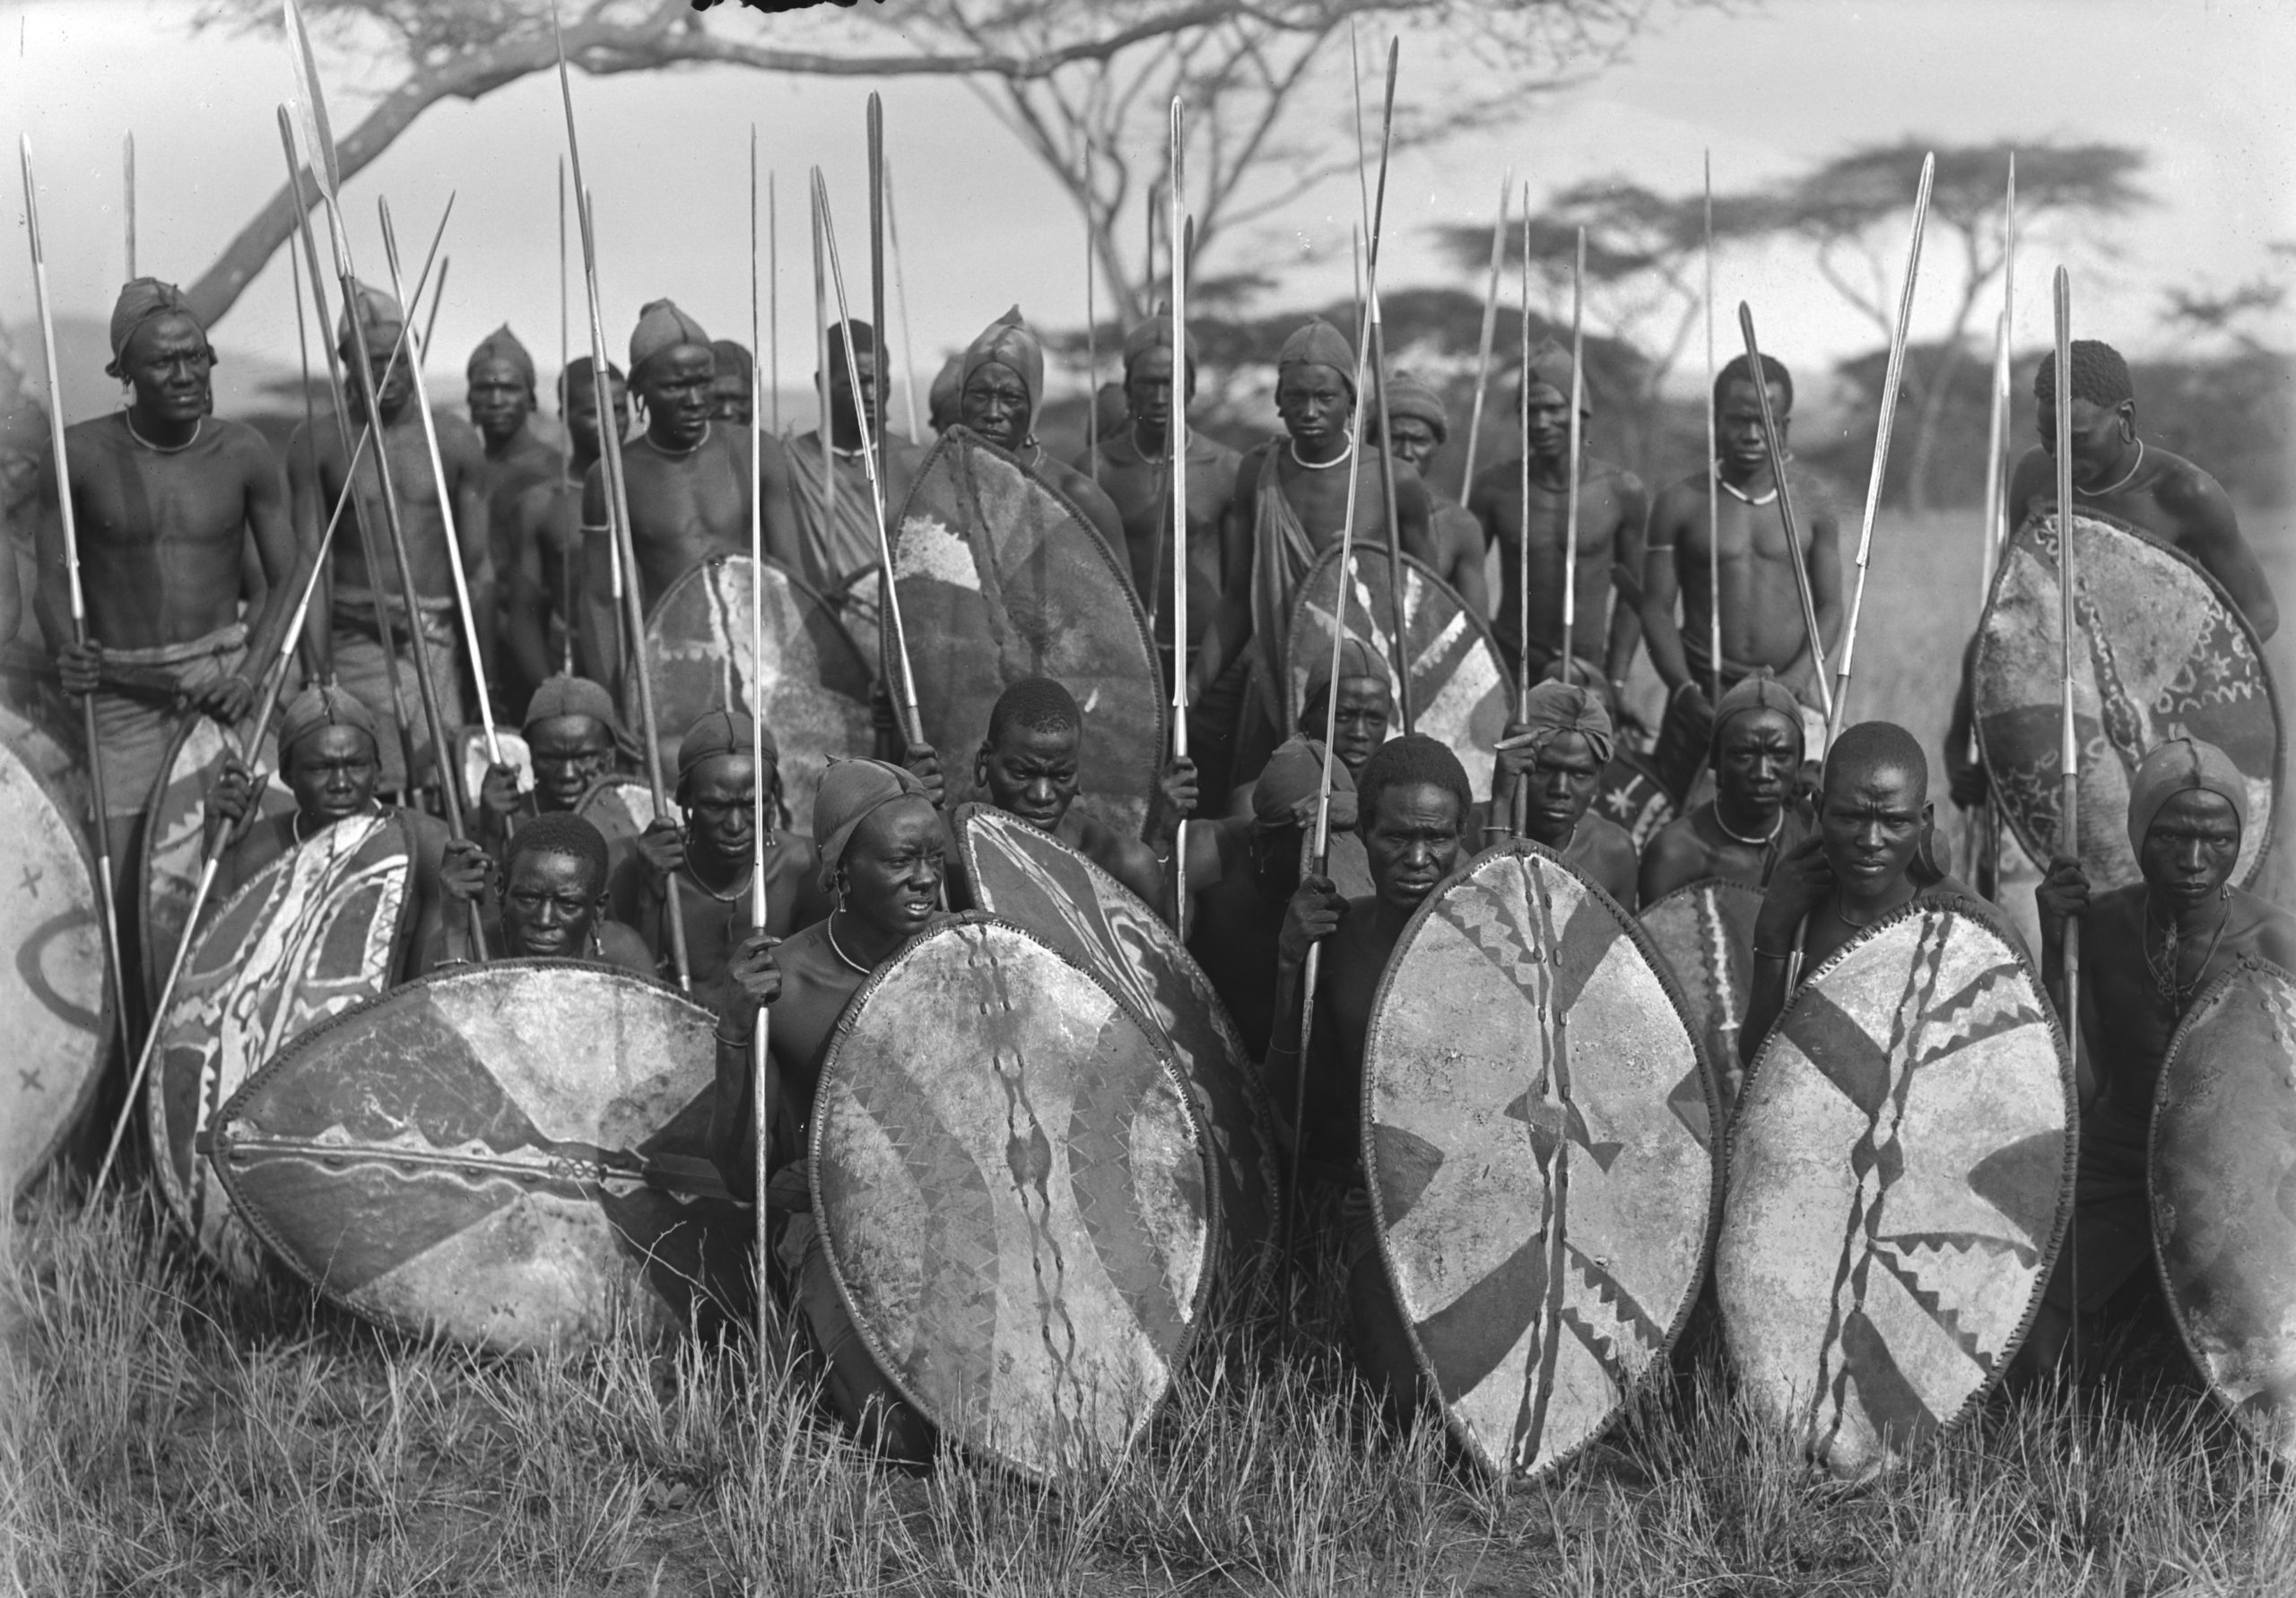 A group of men in Eastern Kenya, some sitting down and some standing, pose holding spears and pigment decorated shields, 1926